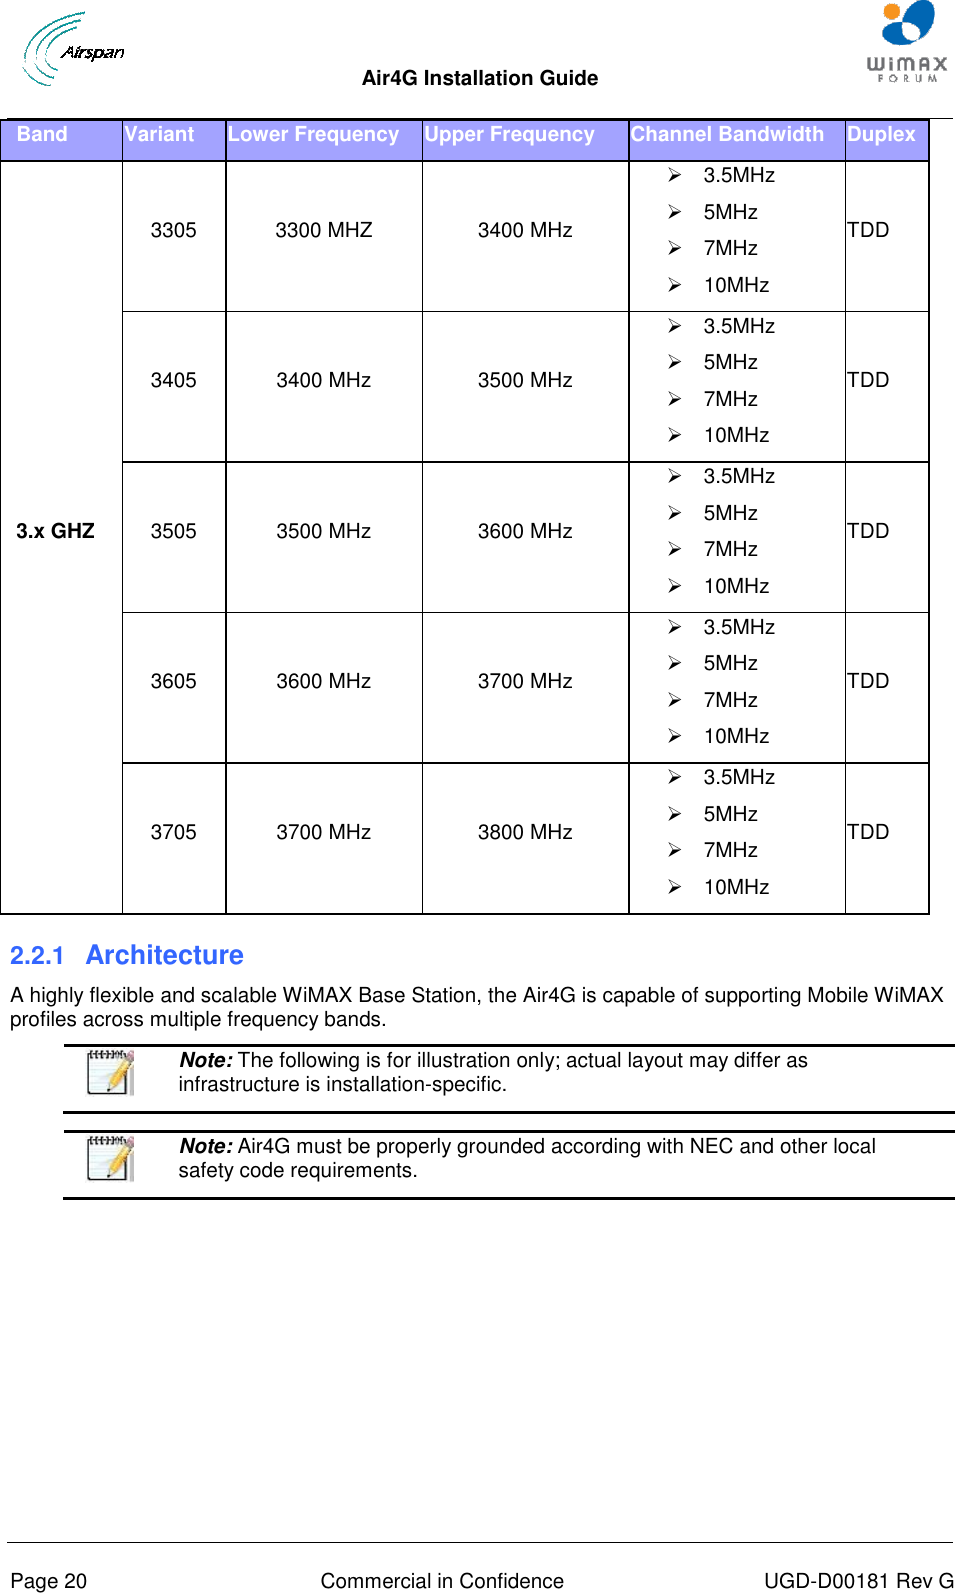  Air4G Installation Guide       Page 20  Commercial in Confidence  UGD-D00181 Rev G Band Variant Lower Frequency Upper Frequency Channel Bandwidth Duplex 3.x GHZ 3305 3300 MHZ 3400 MHz   3.5MHz   5MHz   7MHz   10MHz TDD 3405 3400 MHz 3500 MHz   3.5MHz   5MHz   7MHz   10MHz TDD 3505 3500 MHz 3600 MHz   3.5MHz   5MHz   7MHz   10MHz TDD 3605 3600 MHz 3700 MHz   3.5MHz   5MHz   7MHz   10MHz TDD 3705 3700 MHz 3800 MHz   3.5MHz   5MHz   7MHz   10MHz TDD 2.2.1  Architecture A highly flexible and scalable WiMAX Base Station, the Air4G is capable of supporting Mobile WiMAX profiles across multiple frequency bands.   Note: The following is for illustration only; actual layout may differ as infrastructure is installation-specific.    Note: Air4G must be properly grounded according with NEC and other local safety code requirements.  